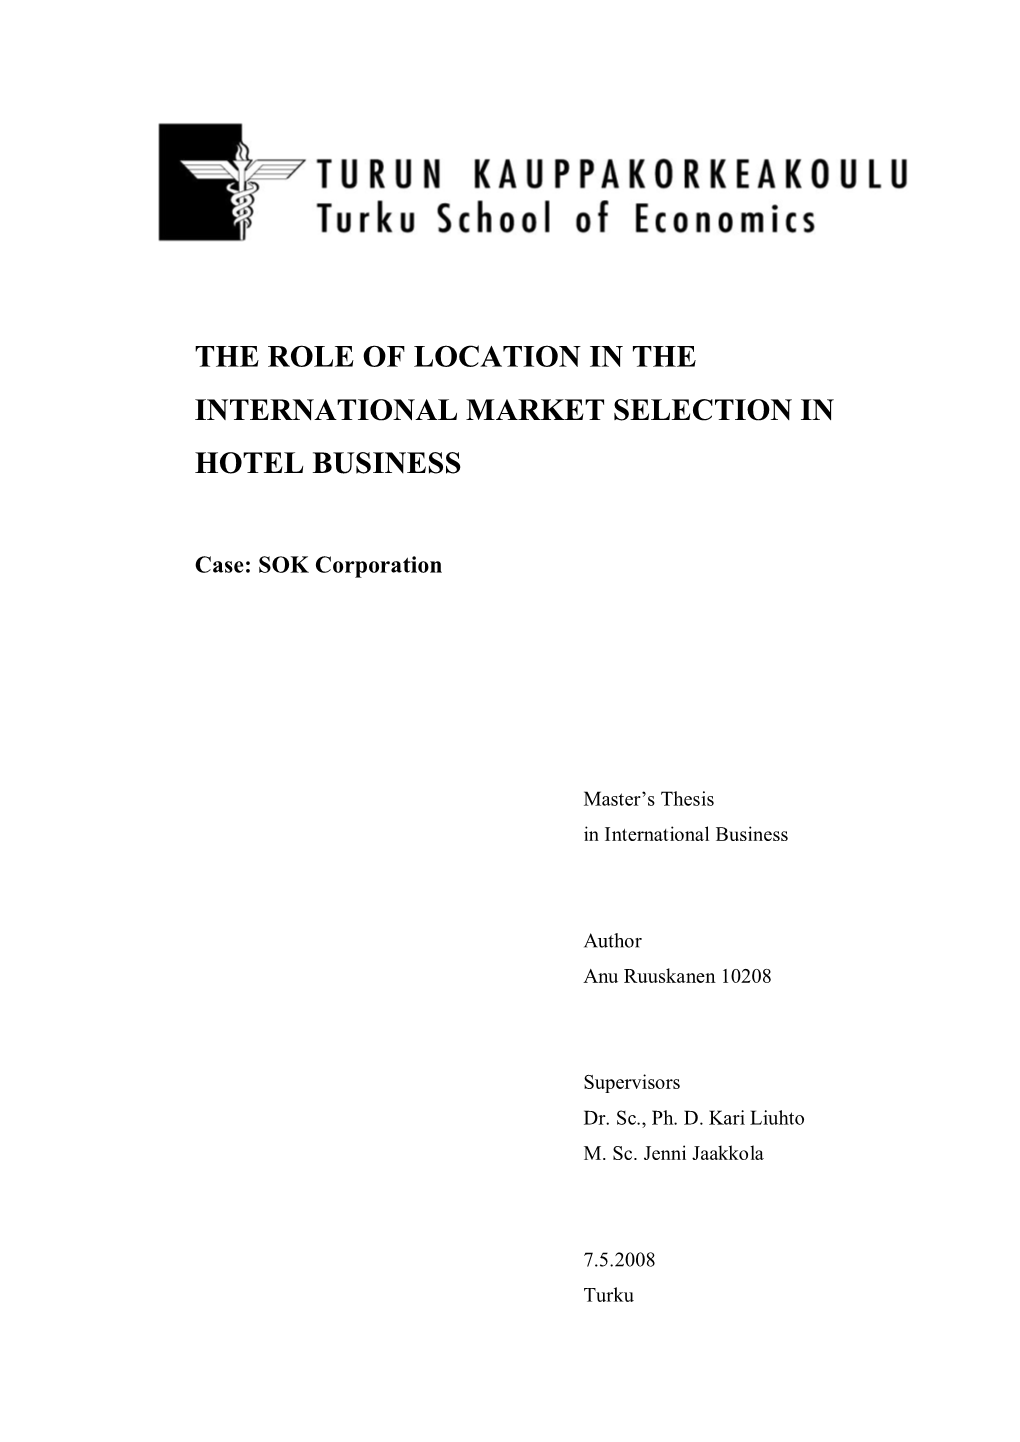 The Role of Location in the International Market Selection in Hotel Business